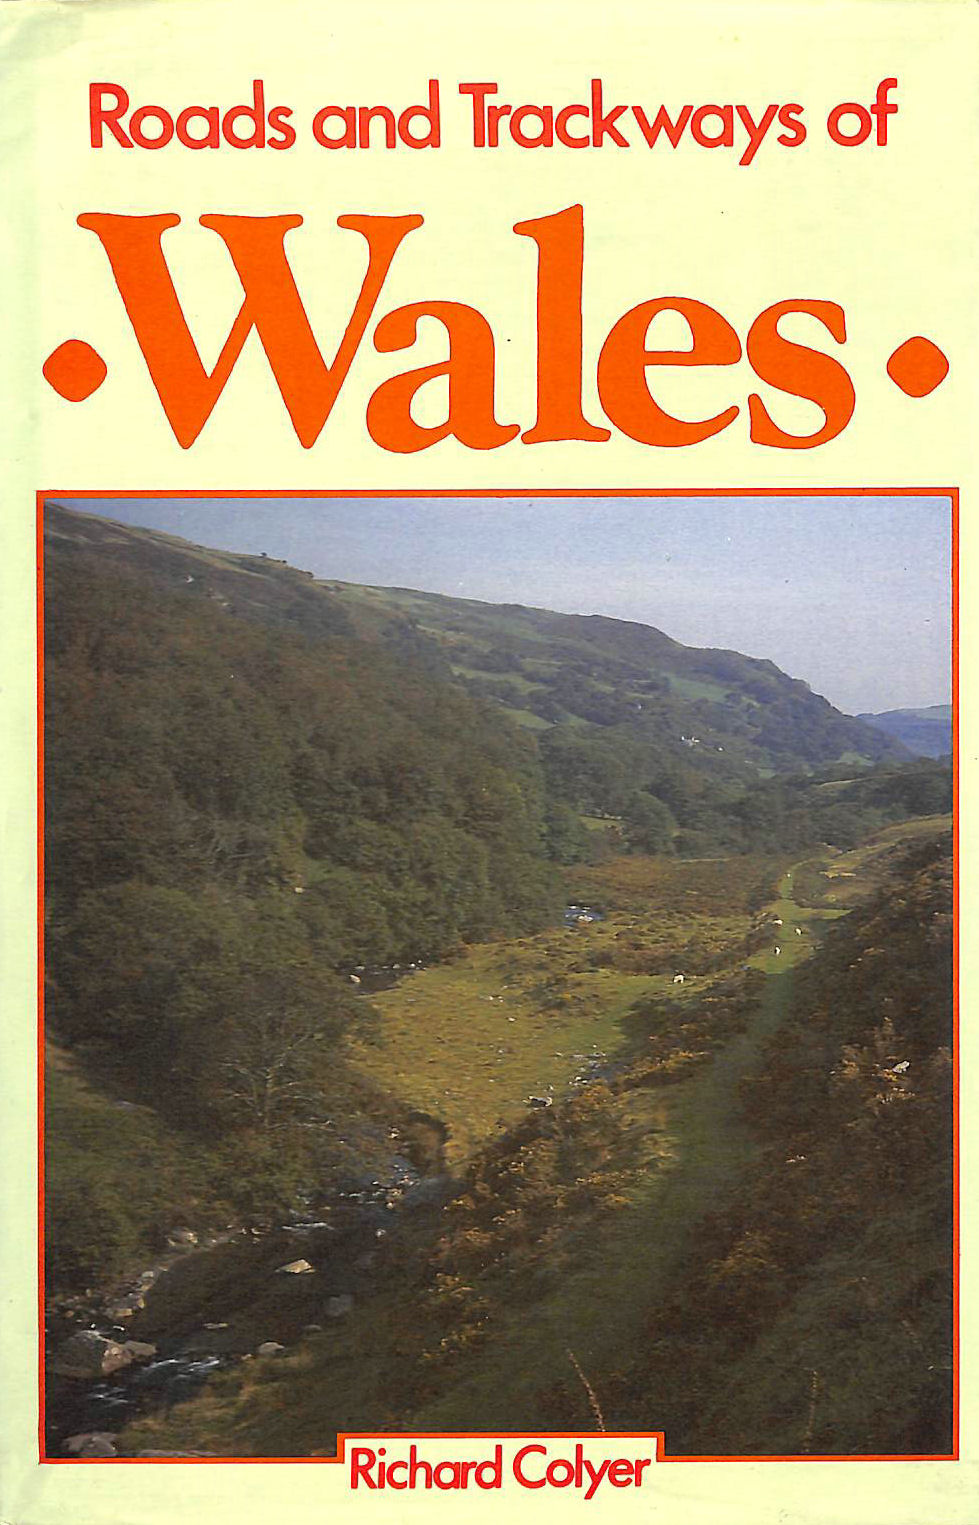 MOORE-COLYER, RICHARD J. - Roads and Trackways of Wales